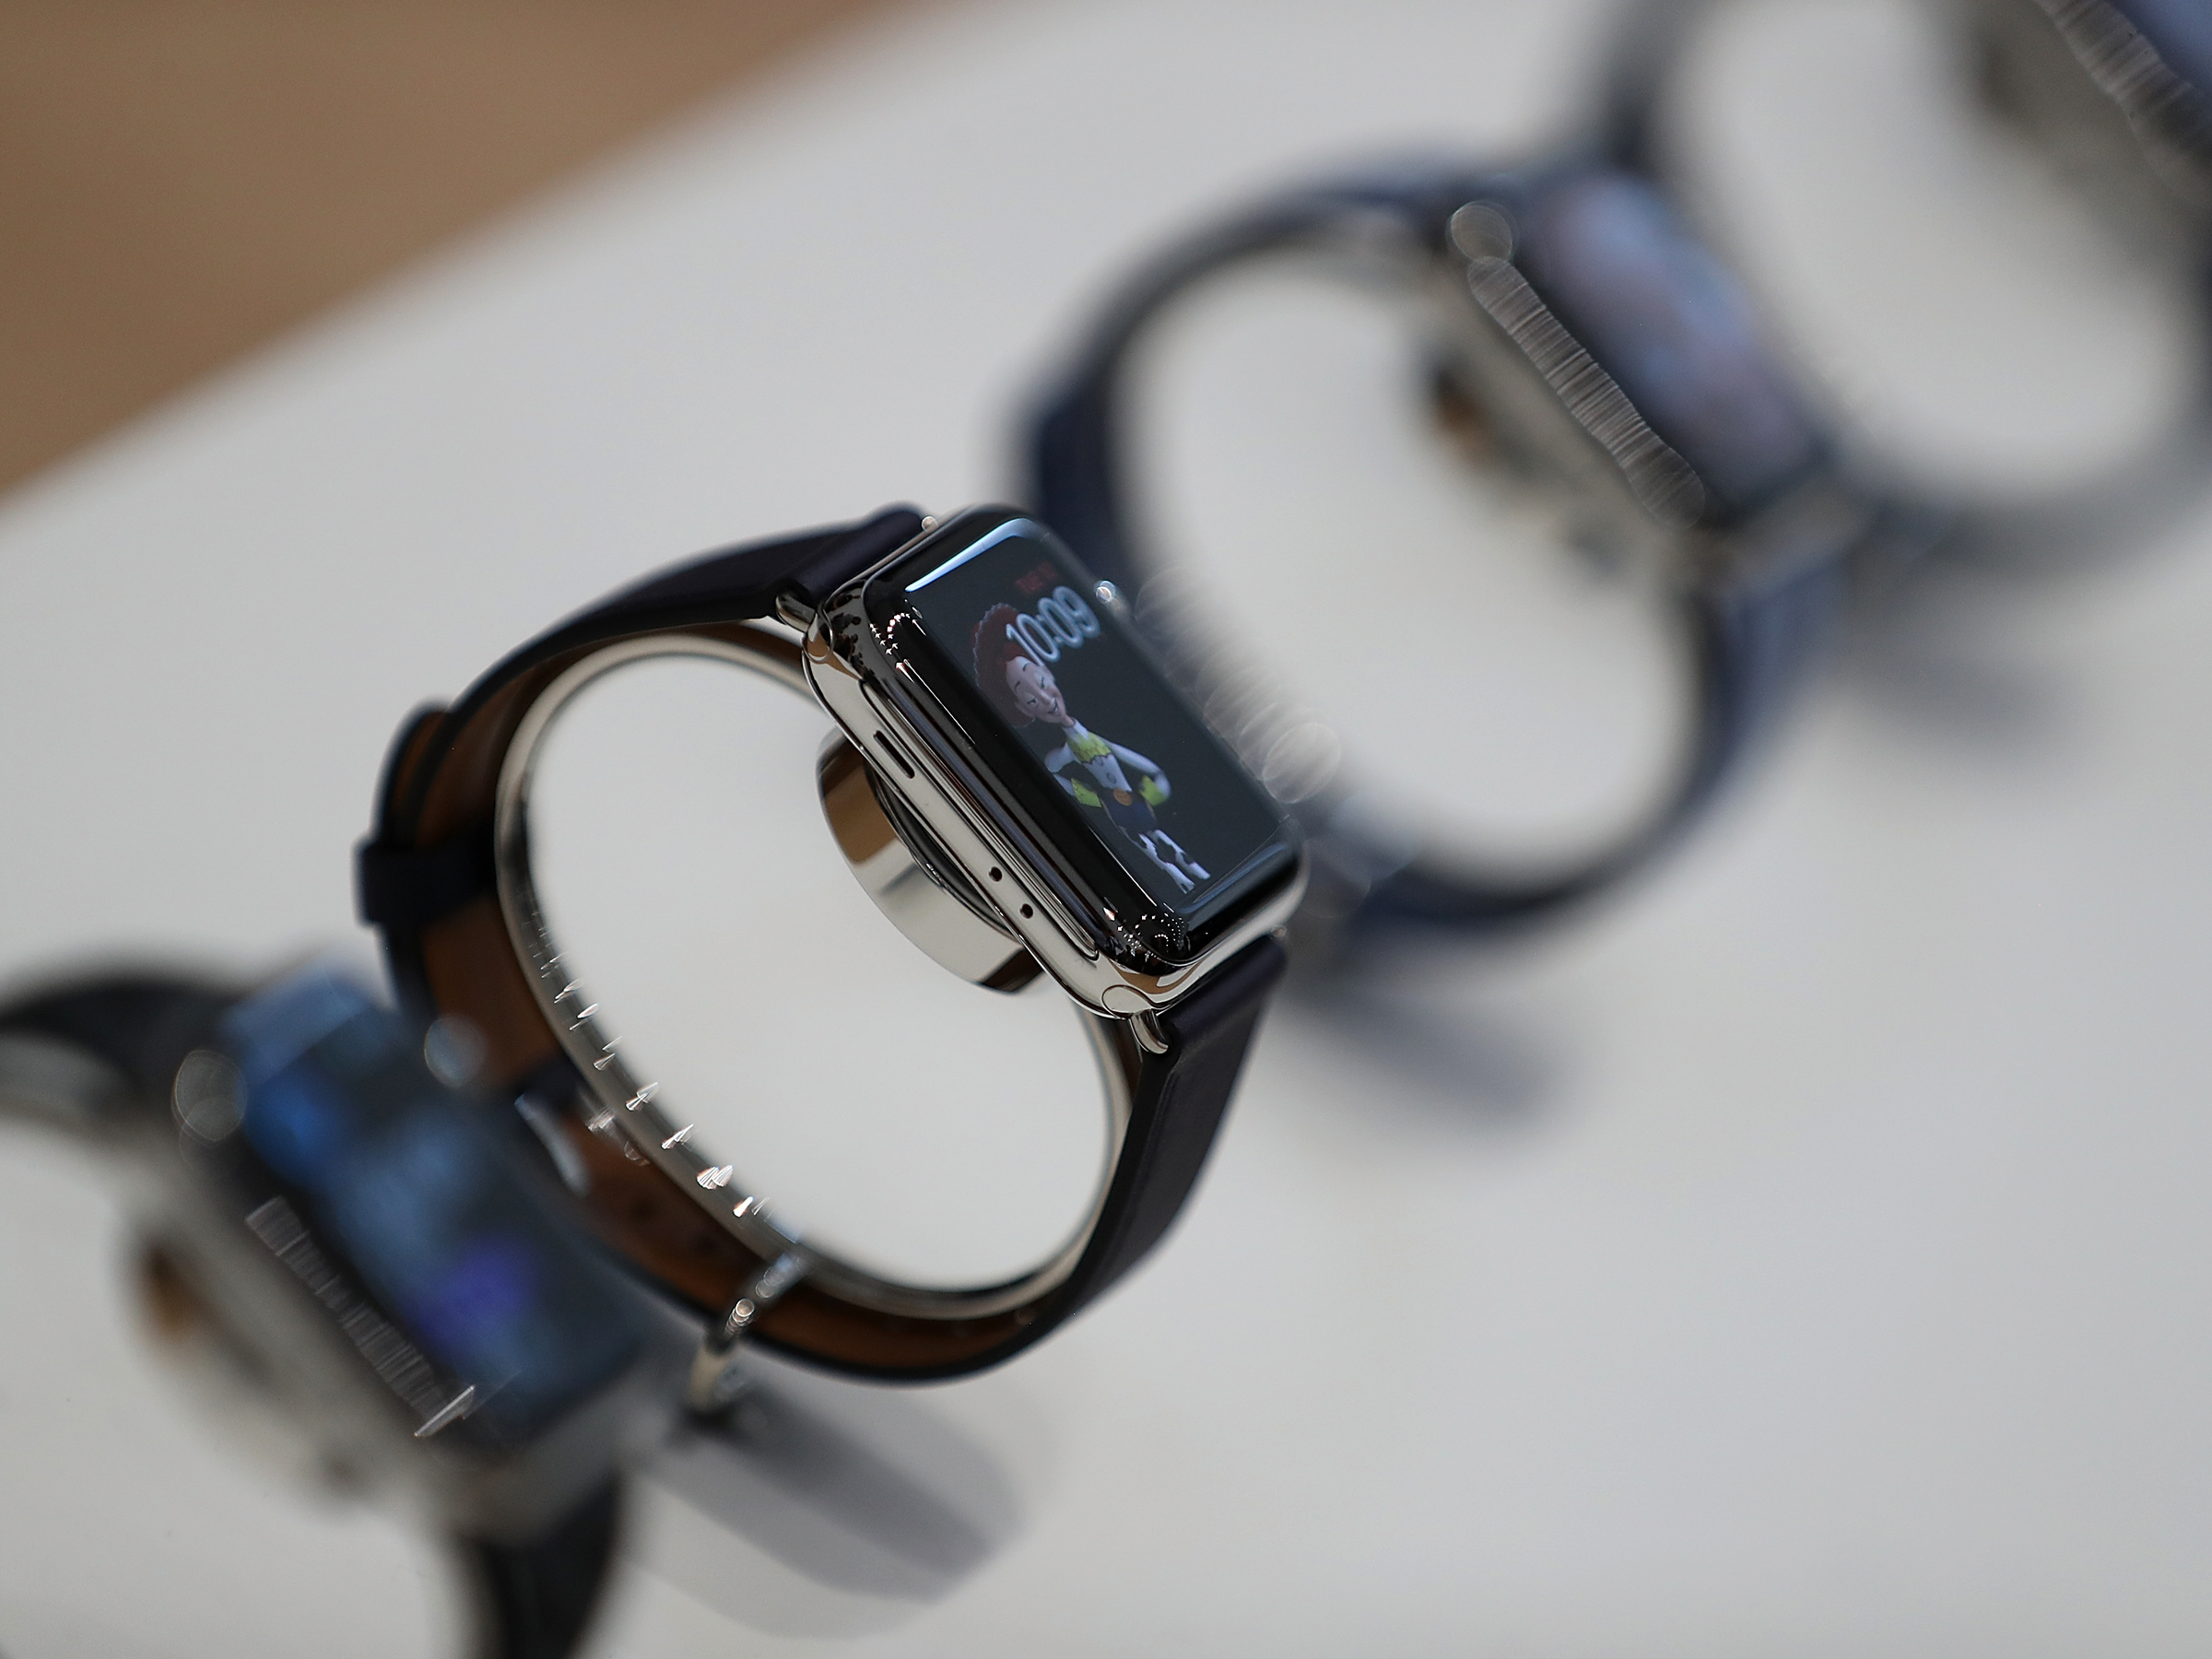 This first look at Oppo's smartwatch shows it's just like an Apple